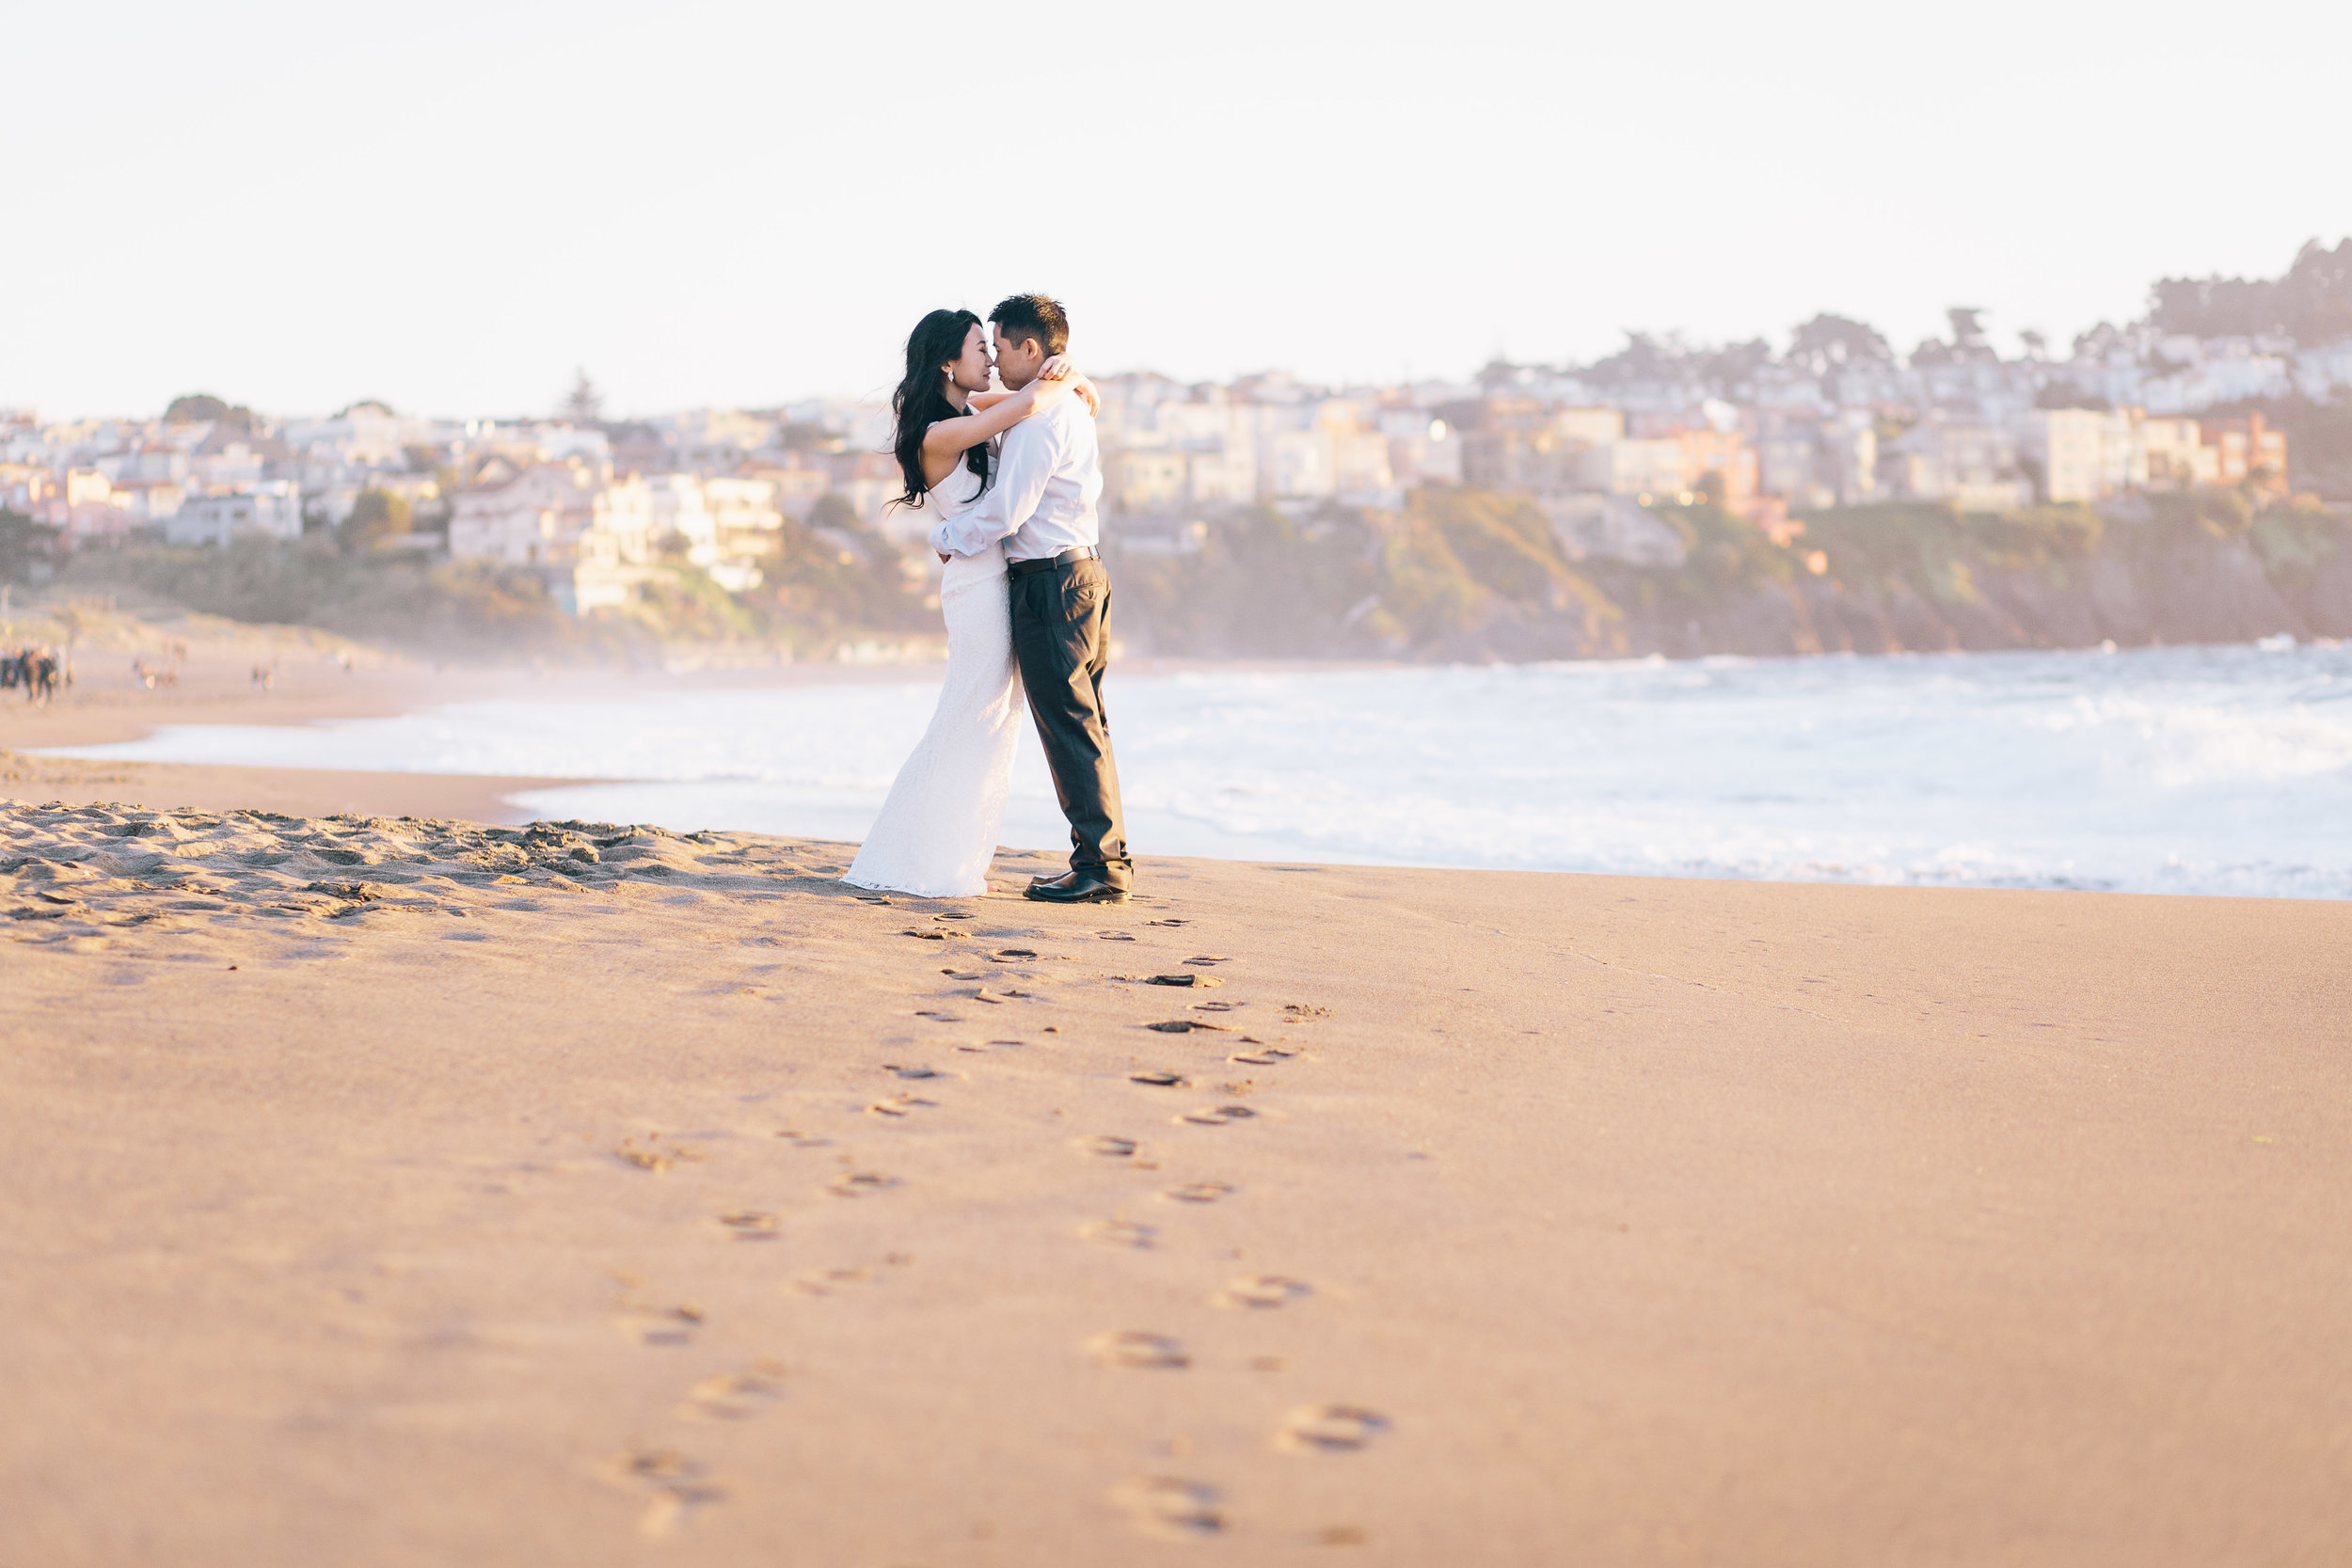 Best Engagement Photo Locations in San Francisco - Baker Beach Engagement Photos by JBJ Pictures (20).jpg